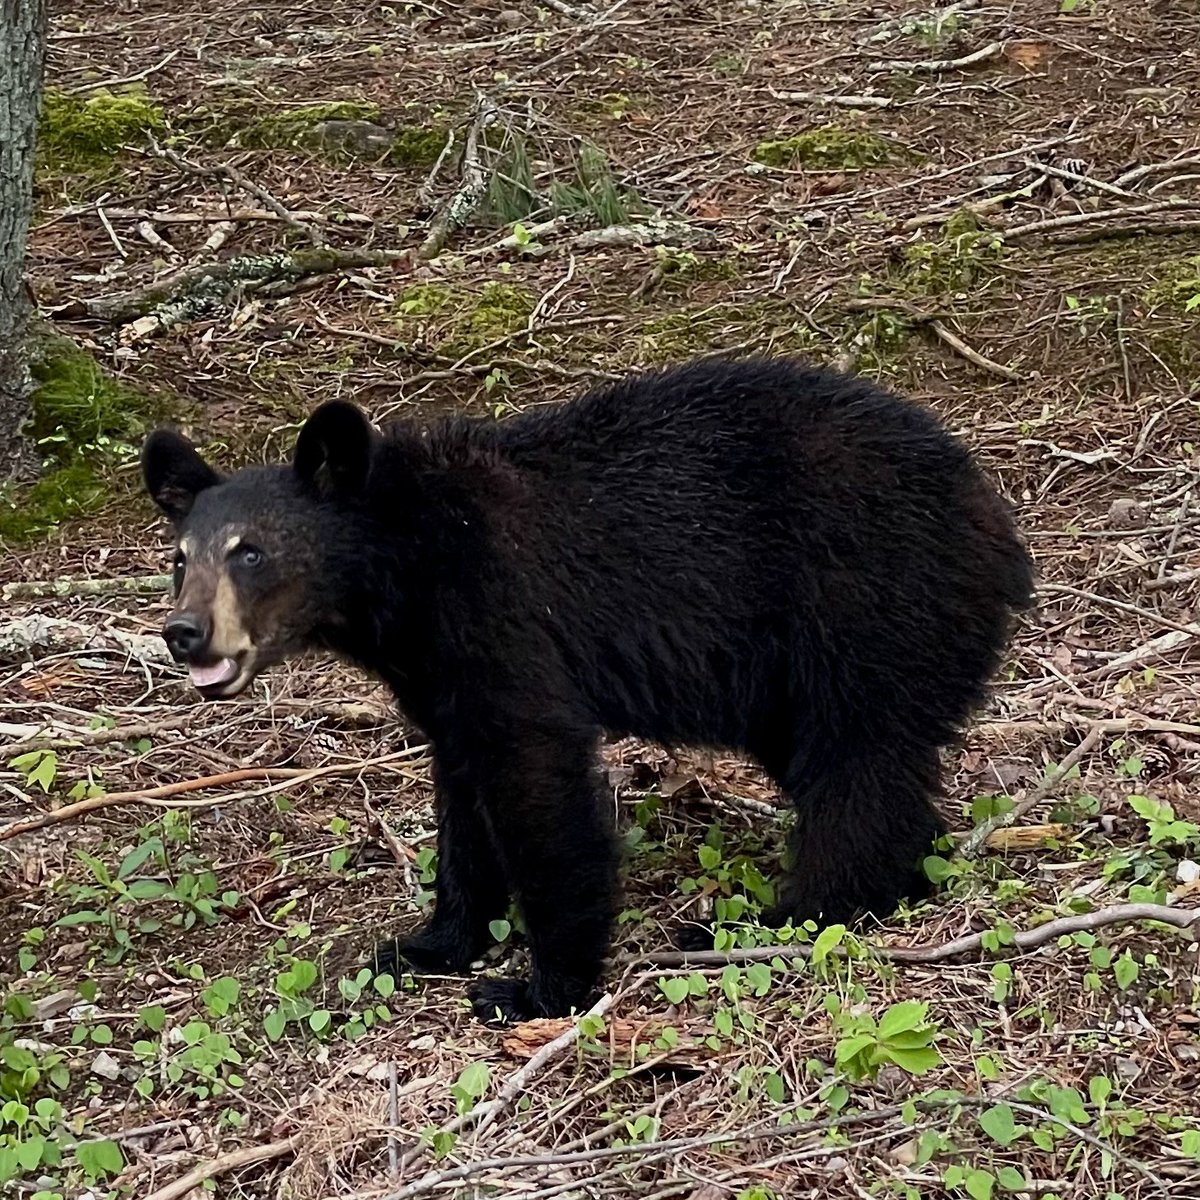 “My face when they call me a cub, but I’m actually a yearling!” Did you know American black bears stay with their mothers for about 18 months? Cubs in the spring only weigh about 5 pounds when they emerge from their dens, while most yearlings weigh about 30–50 pounds!